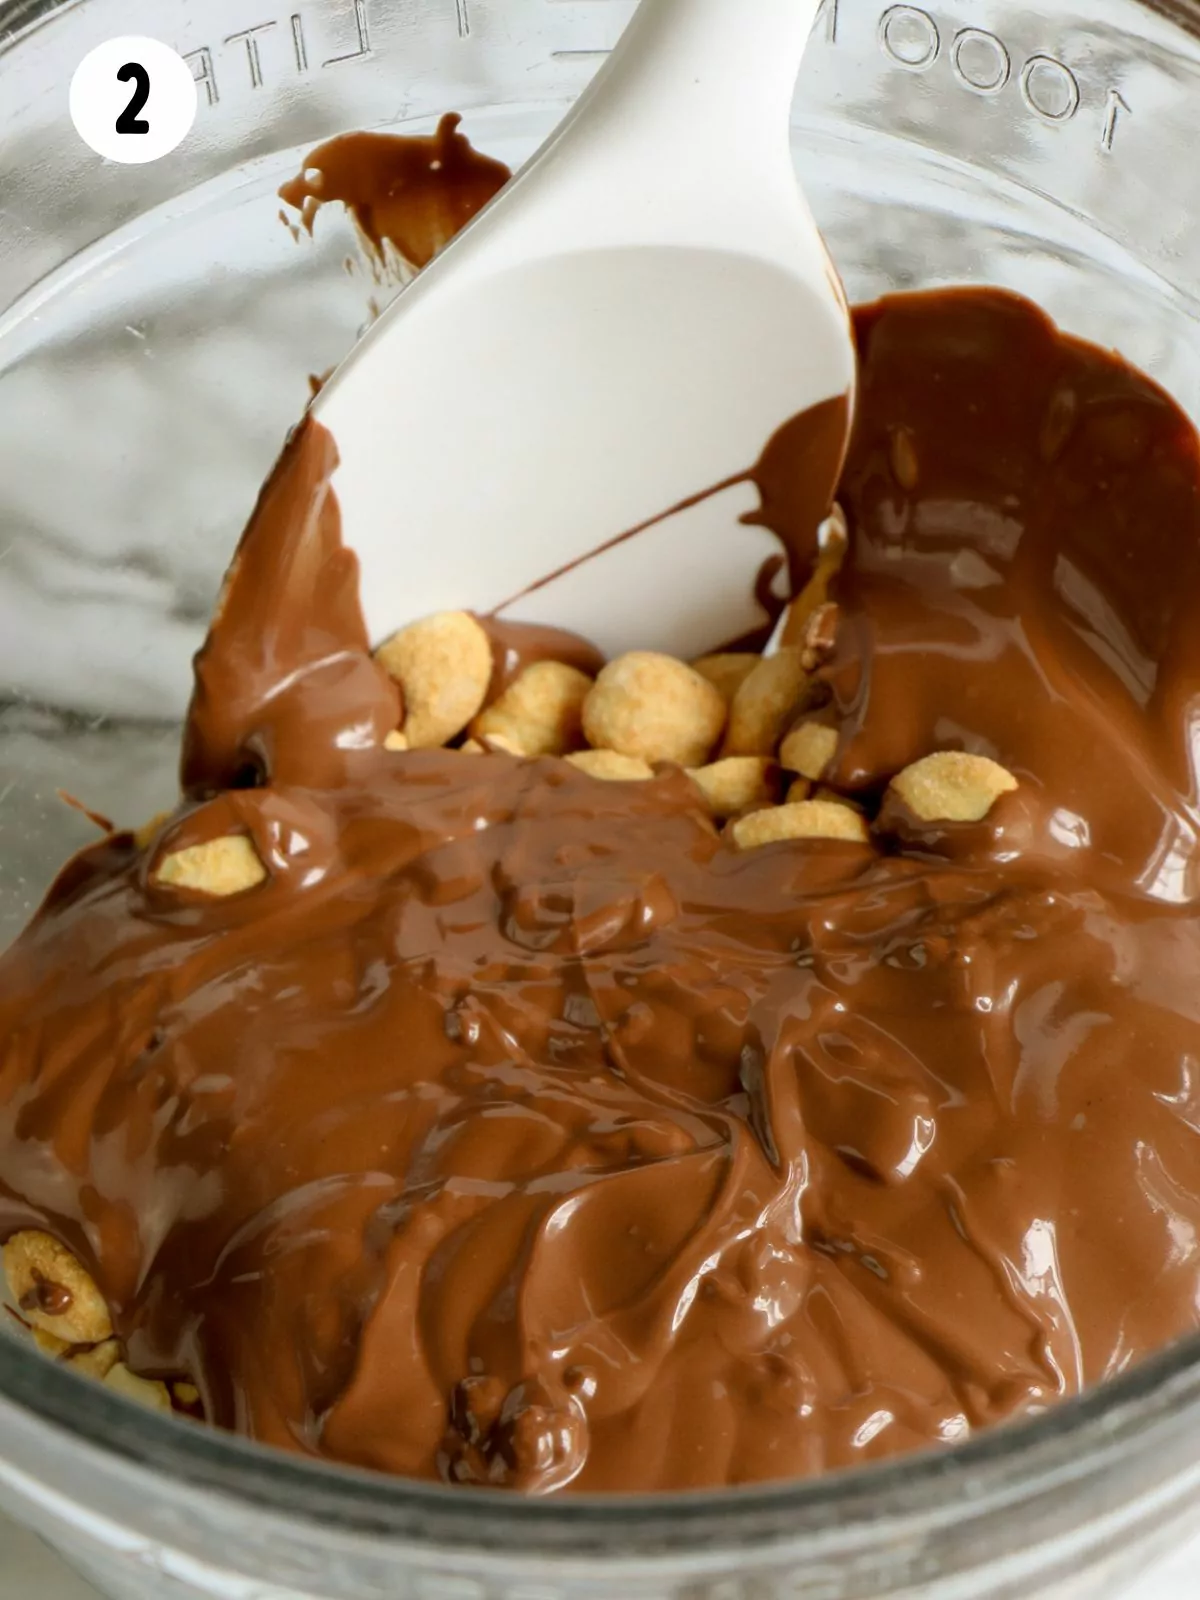 Melted chocolate combined in bowl with peanuts.